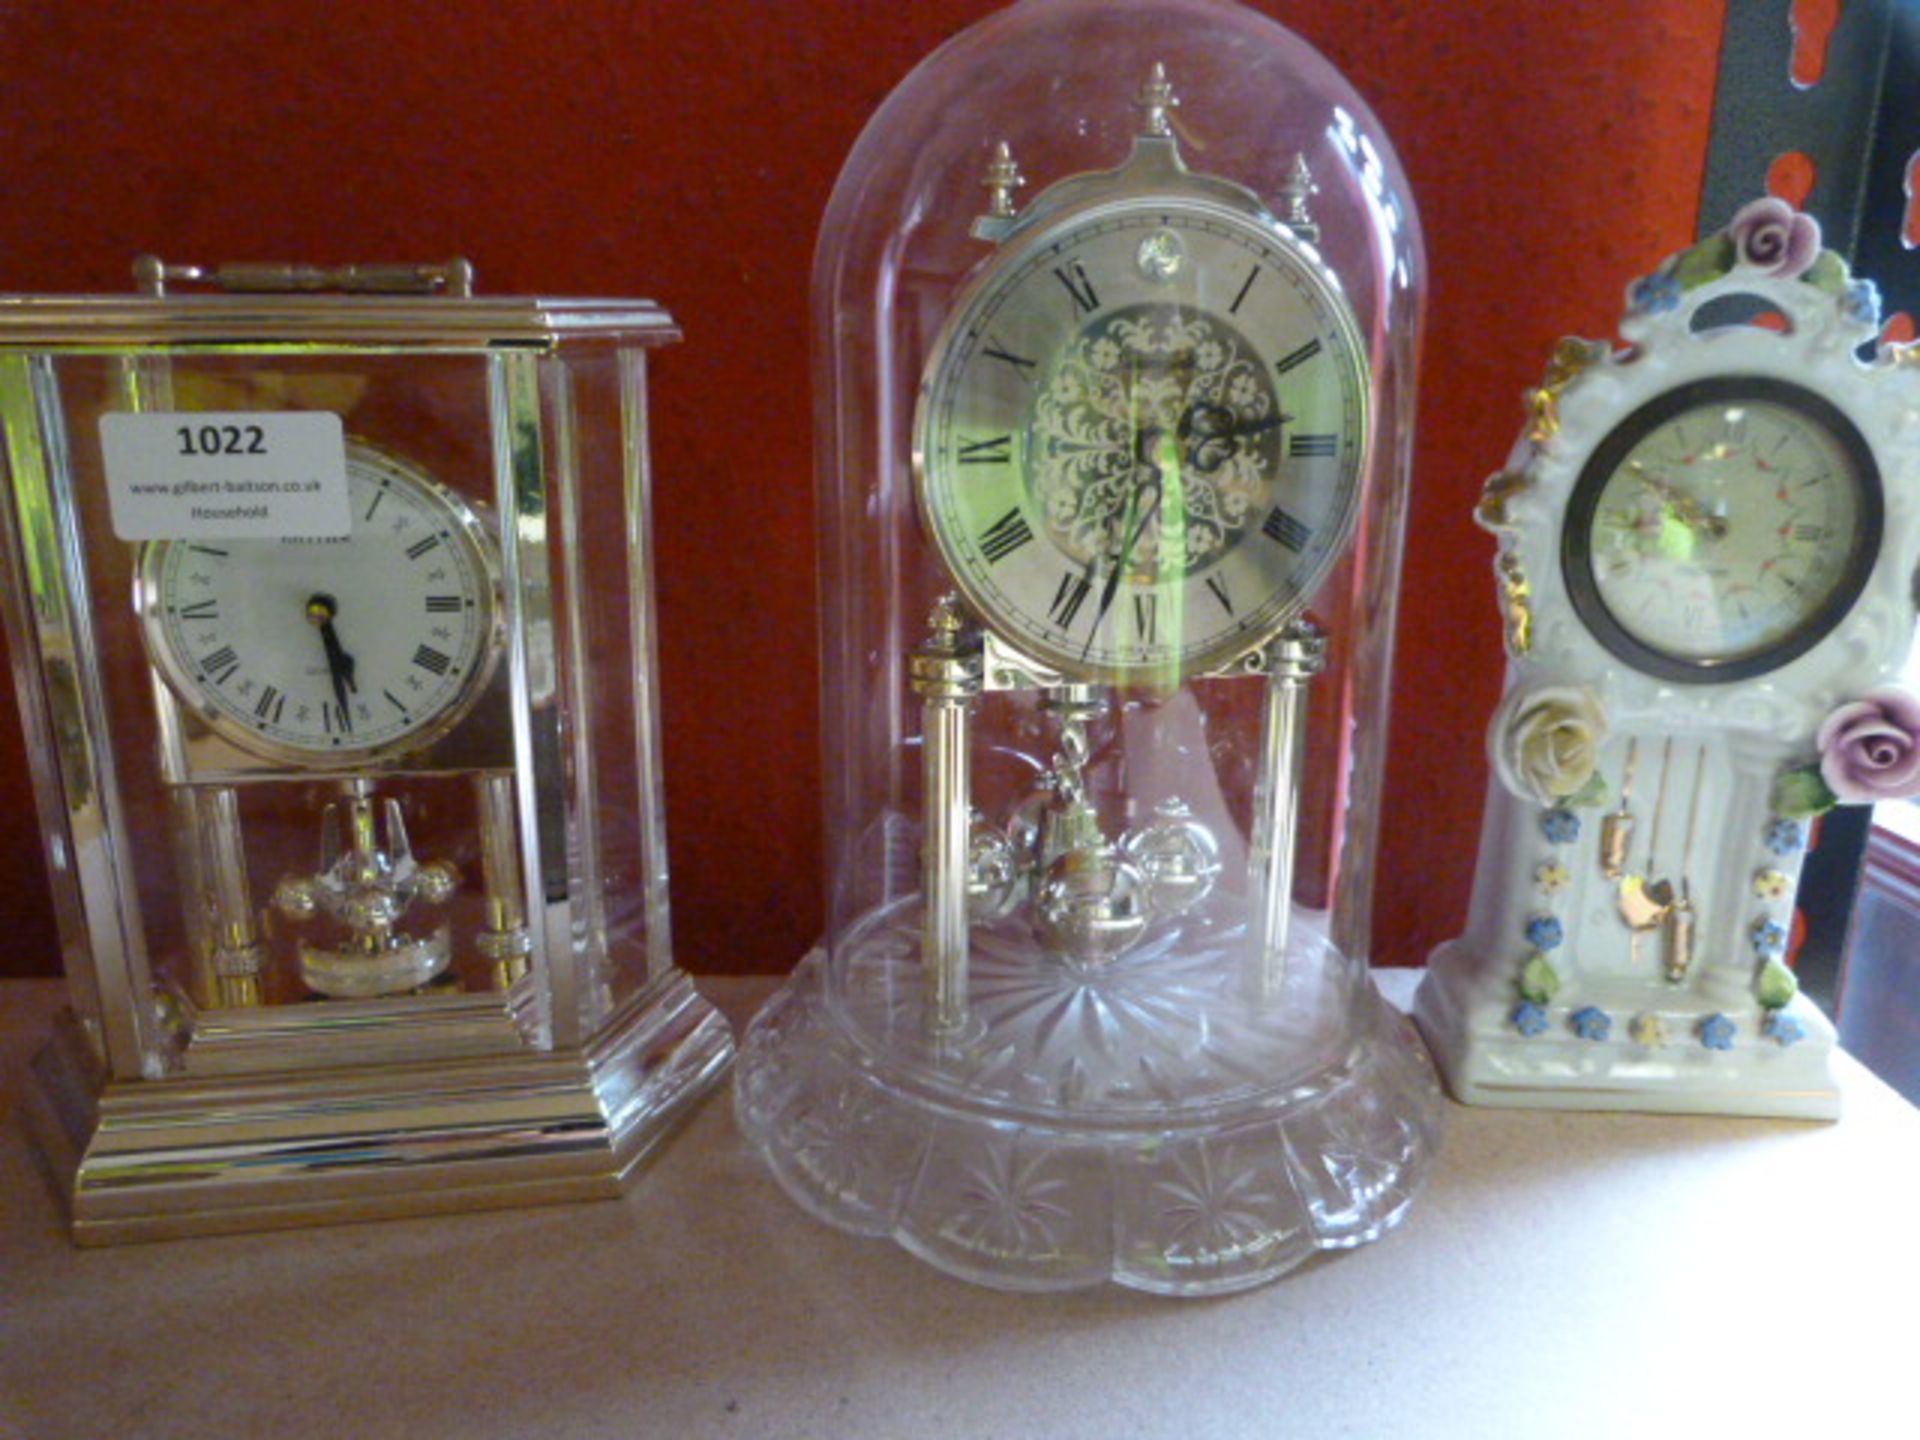 Brass Framed Clock, Glass Dome Clock and an Ornamental Pottery Clock